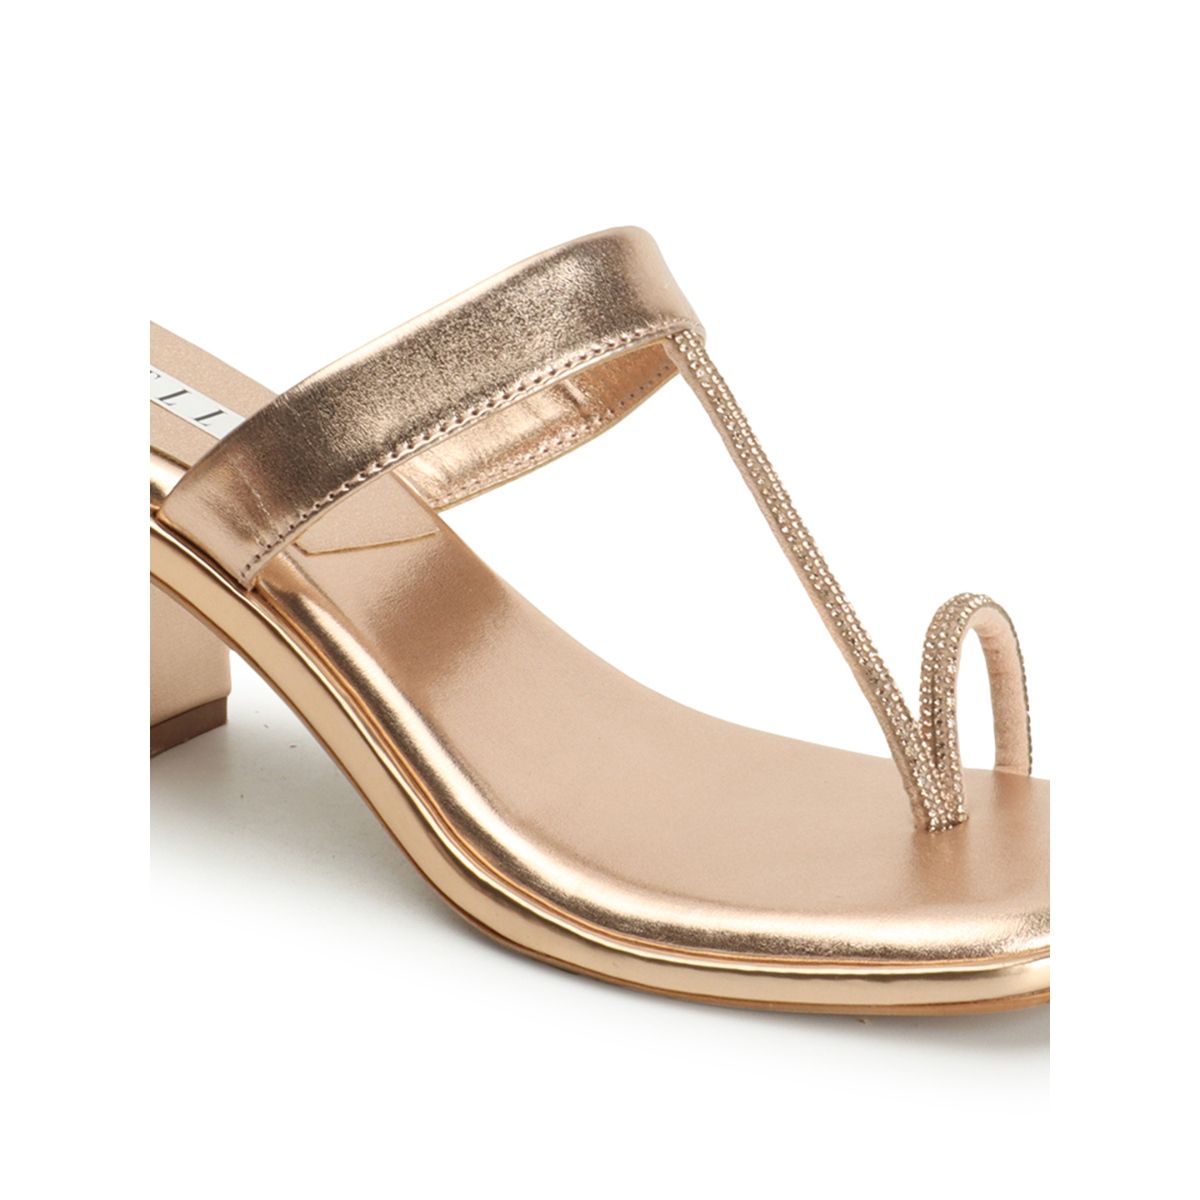 Gold strappy sandals - Women's Clothing Online Made in Italy